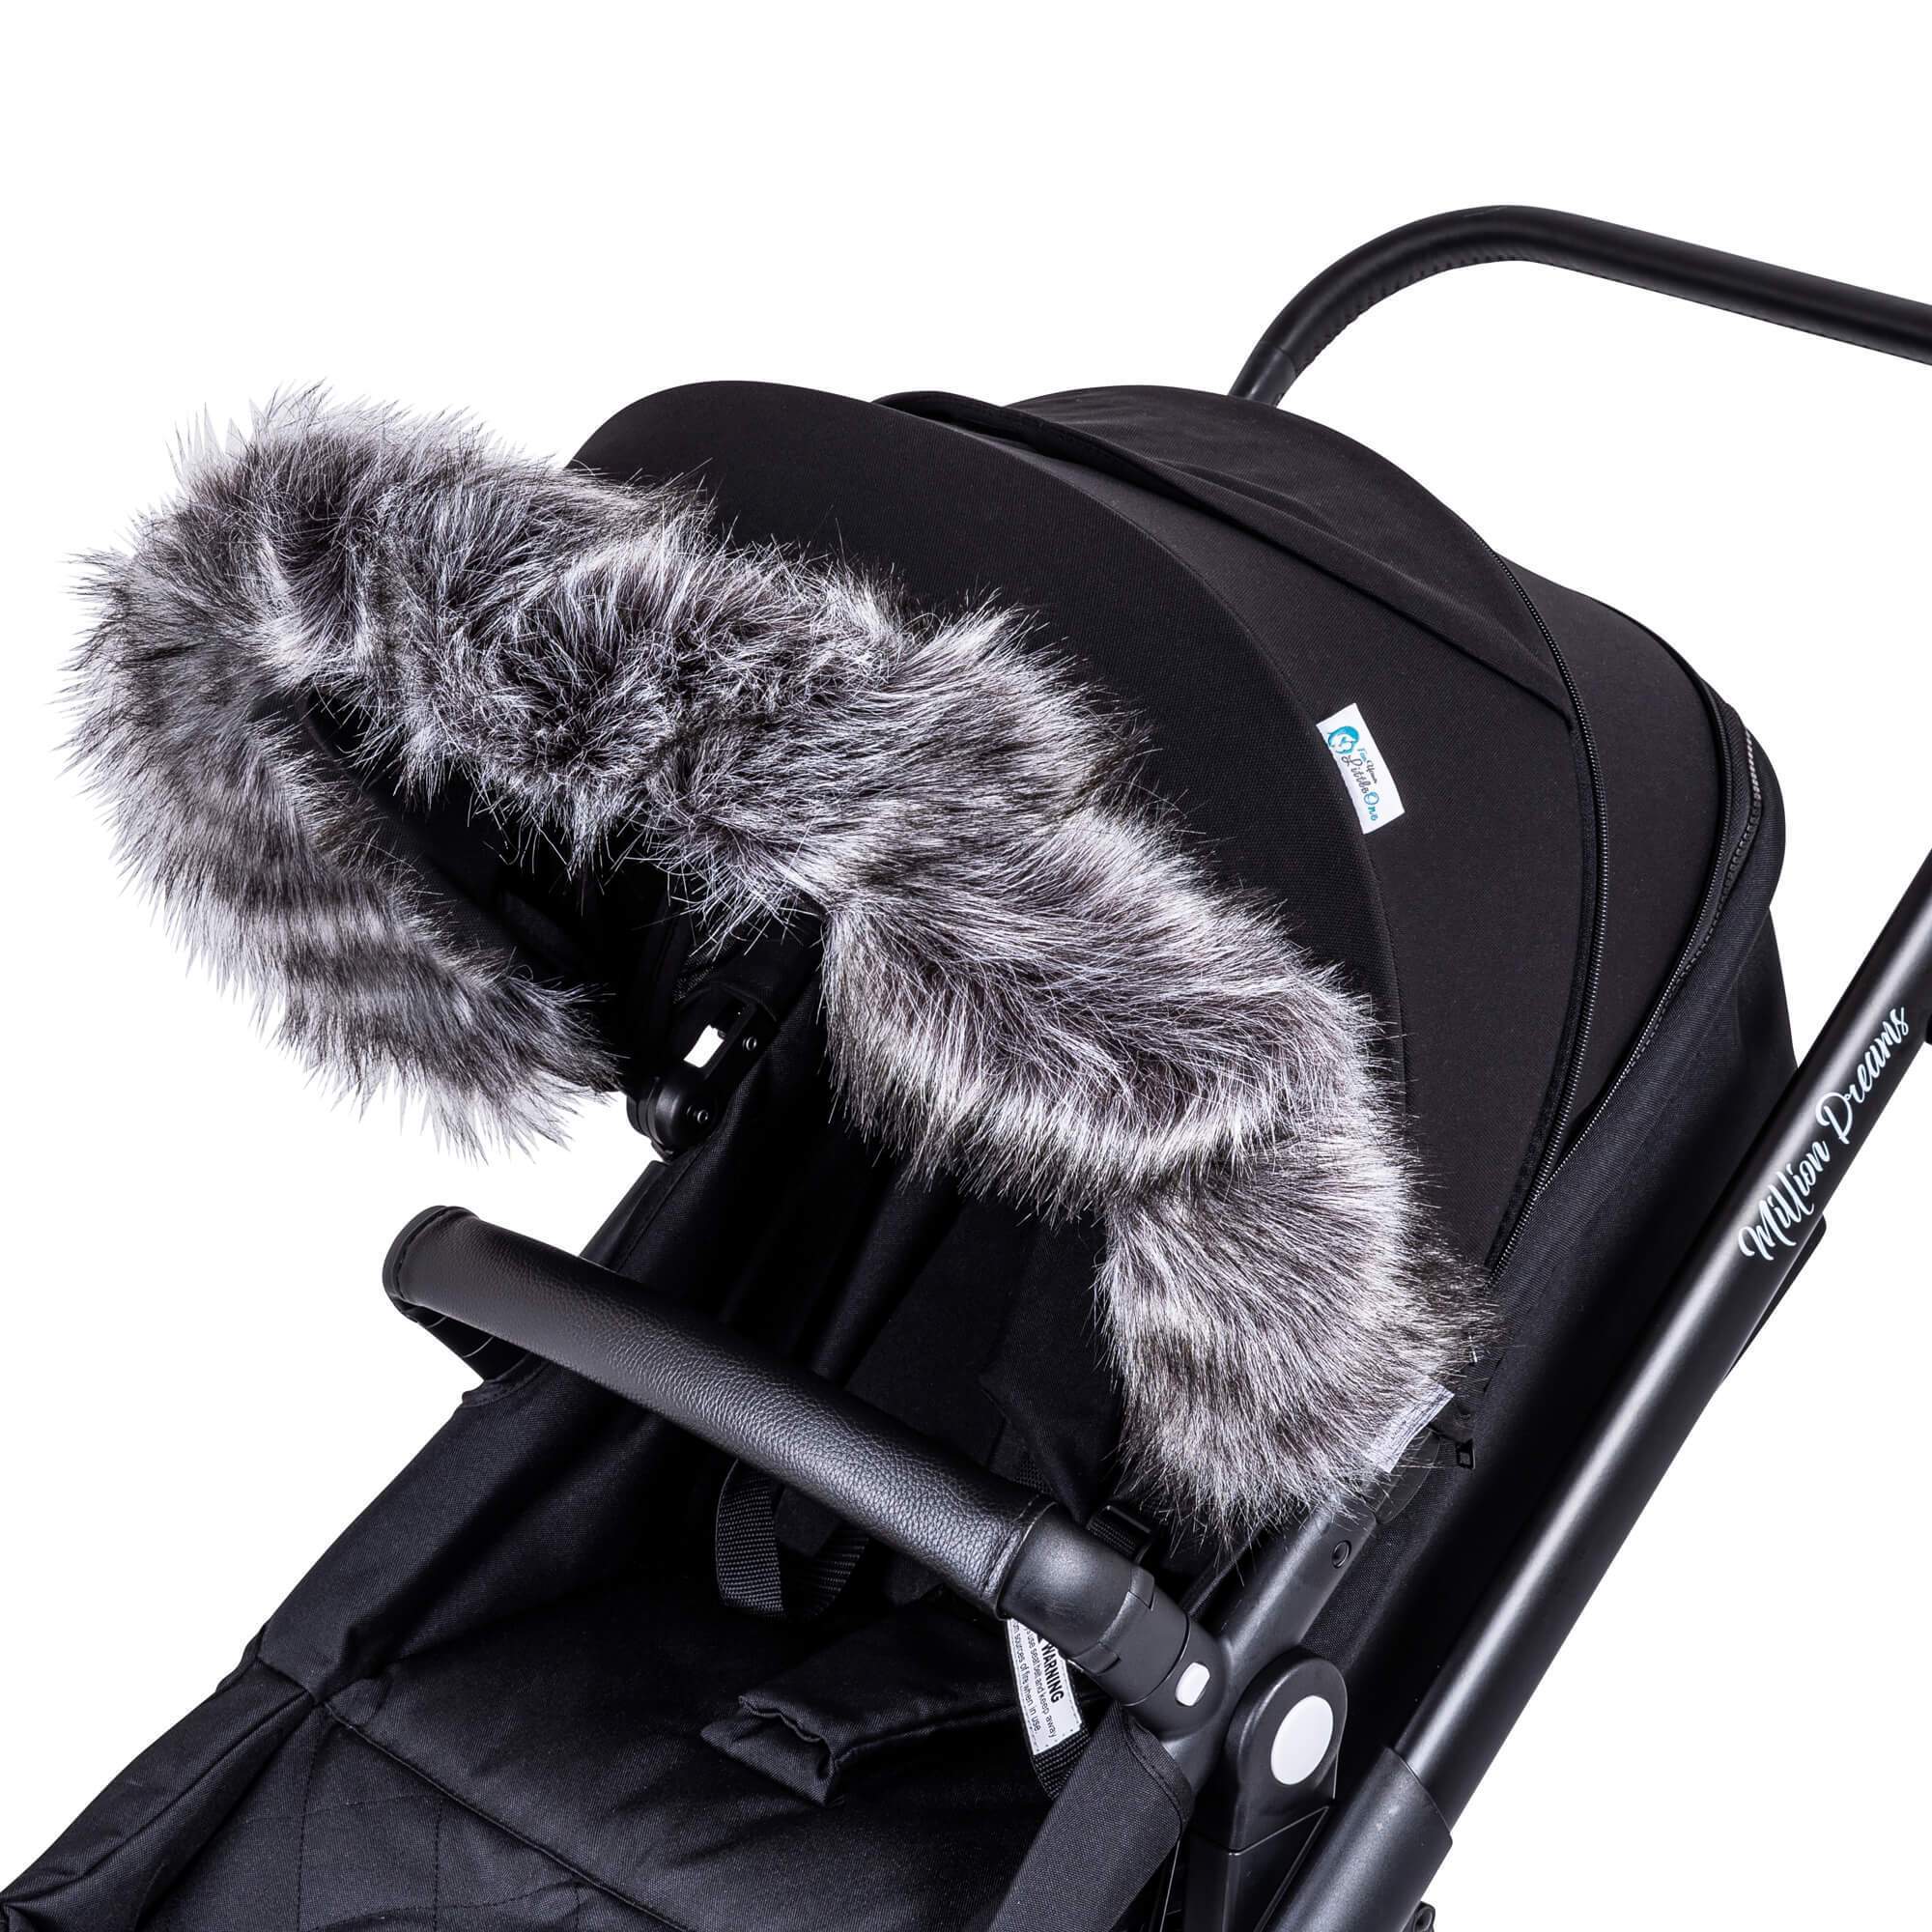 Pram Fur Hood Trim Attachment for Pushchair Compatible with Mamas & Papas -  | For Your Little One